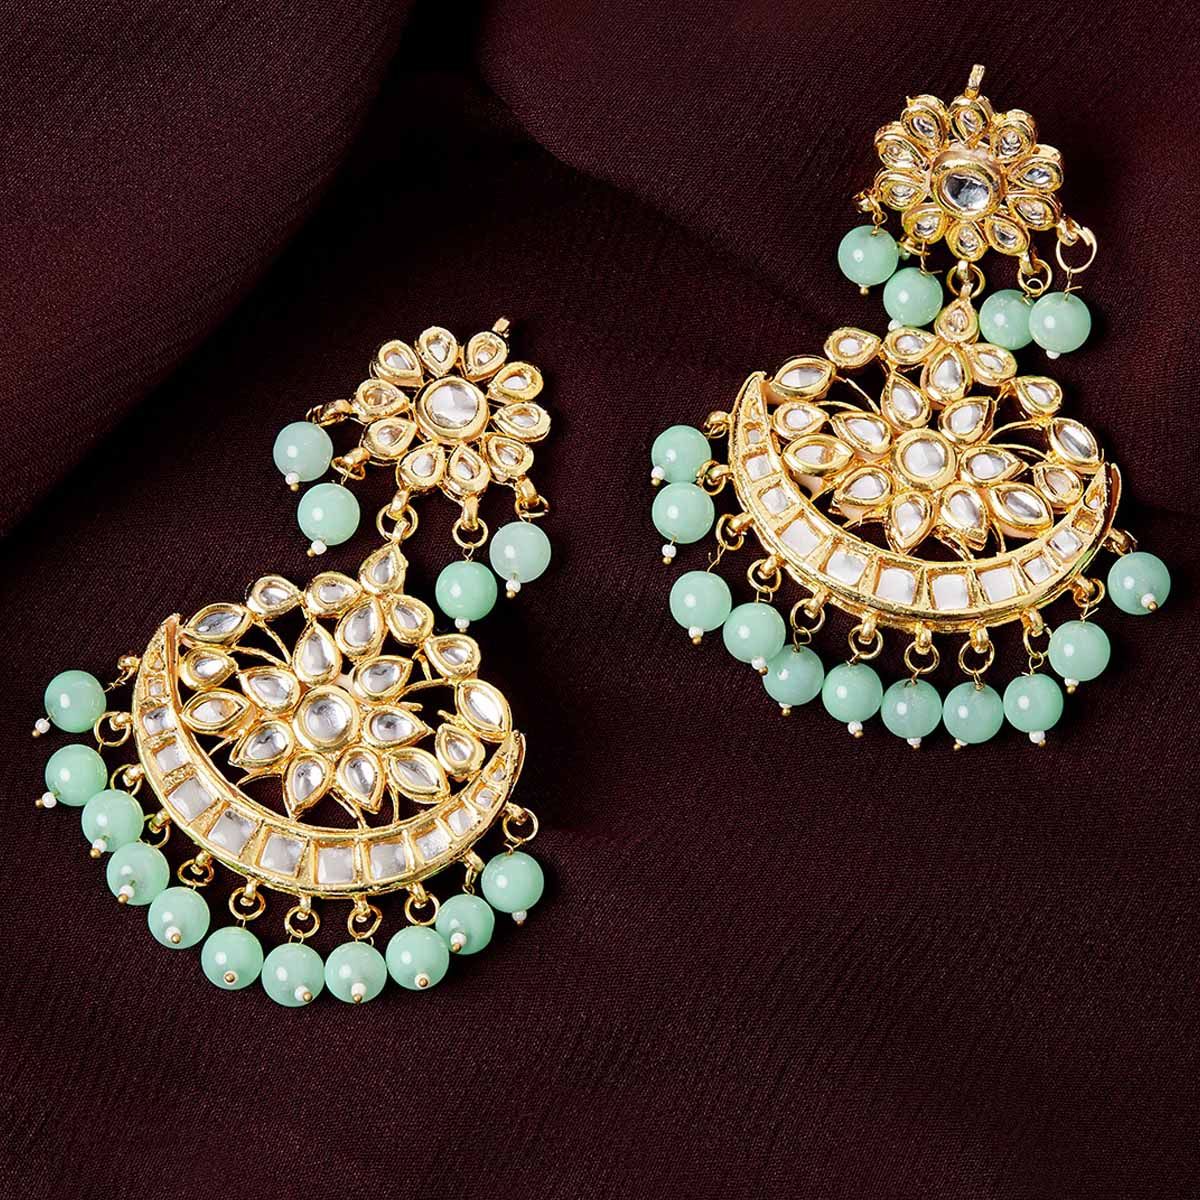 Emerald green earrings Antique gold plated earrings at 1250  Azilaa